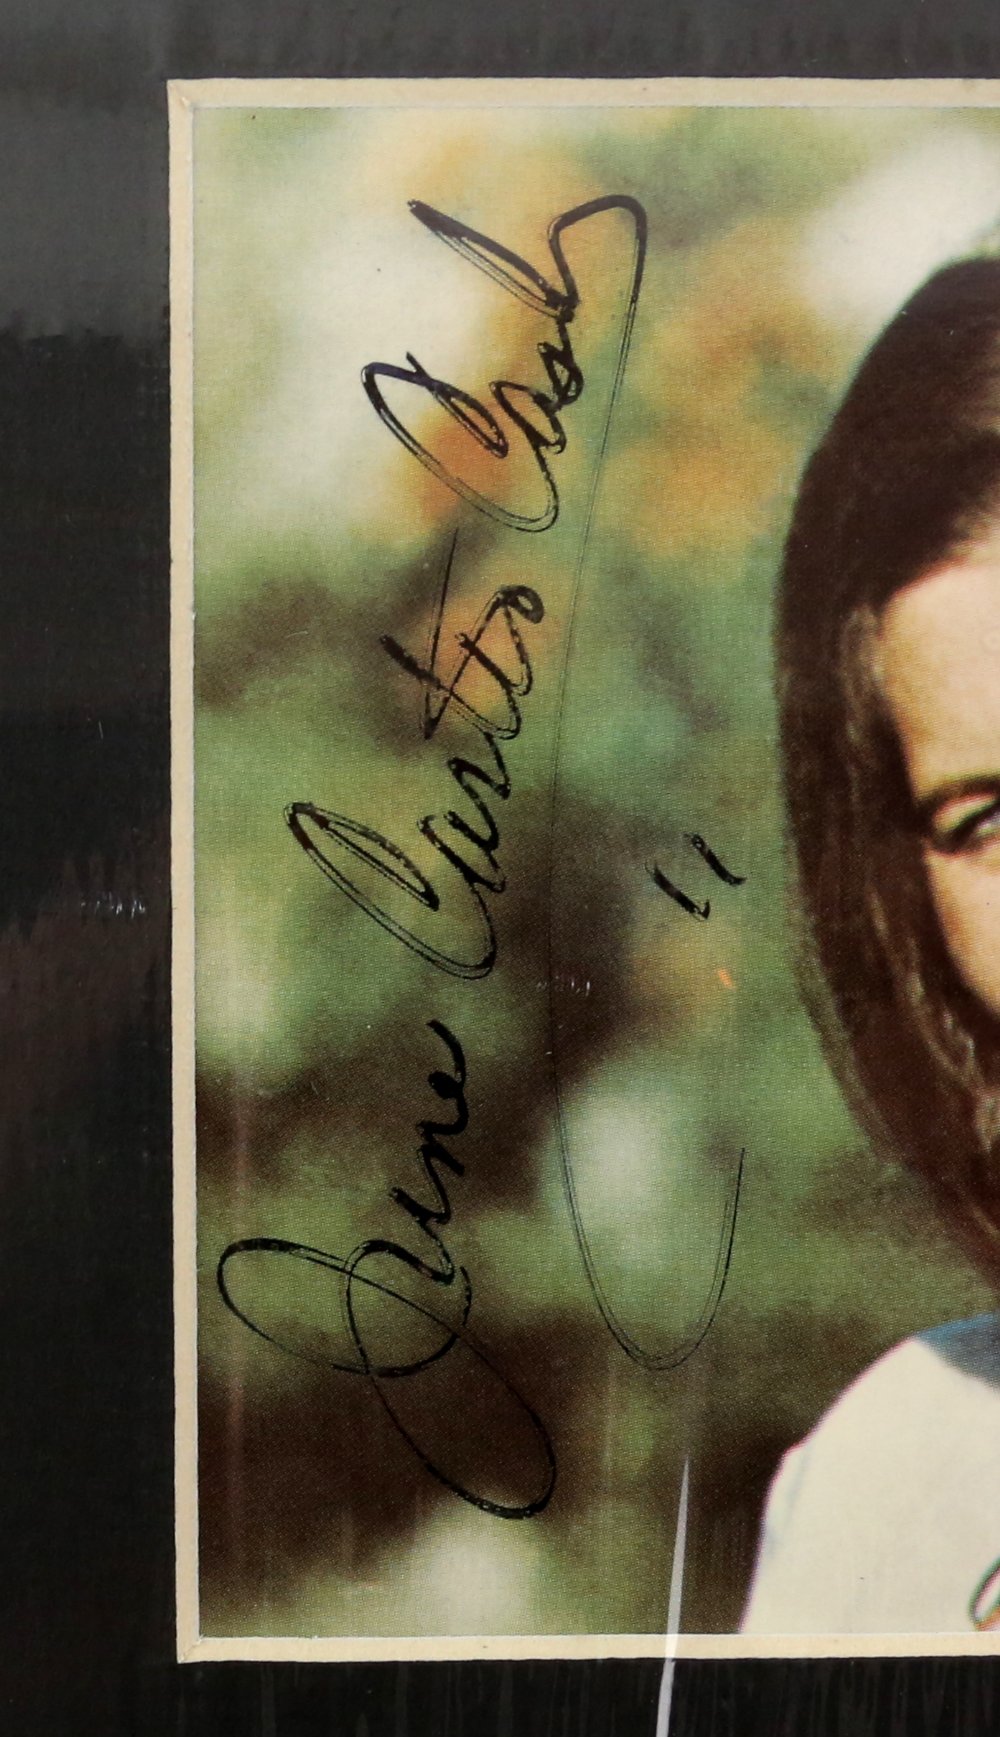 Johnny Cash and June Carter Cash signed photos, large 10 x 8 inches and The Johnny Cash Show - Image 5 of 6